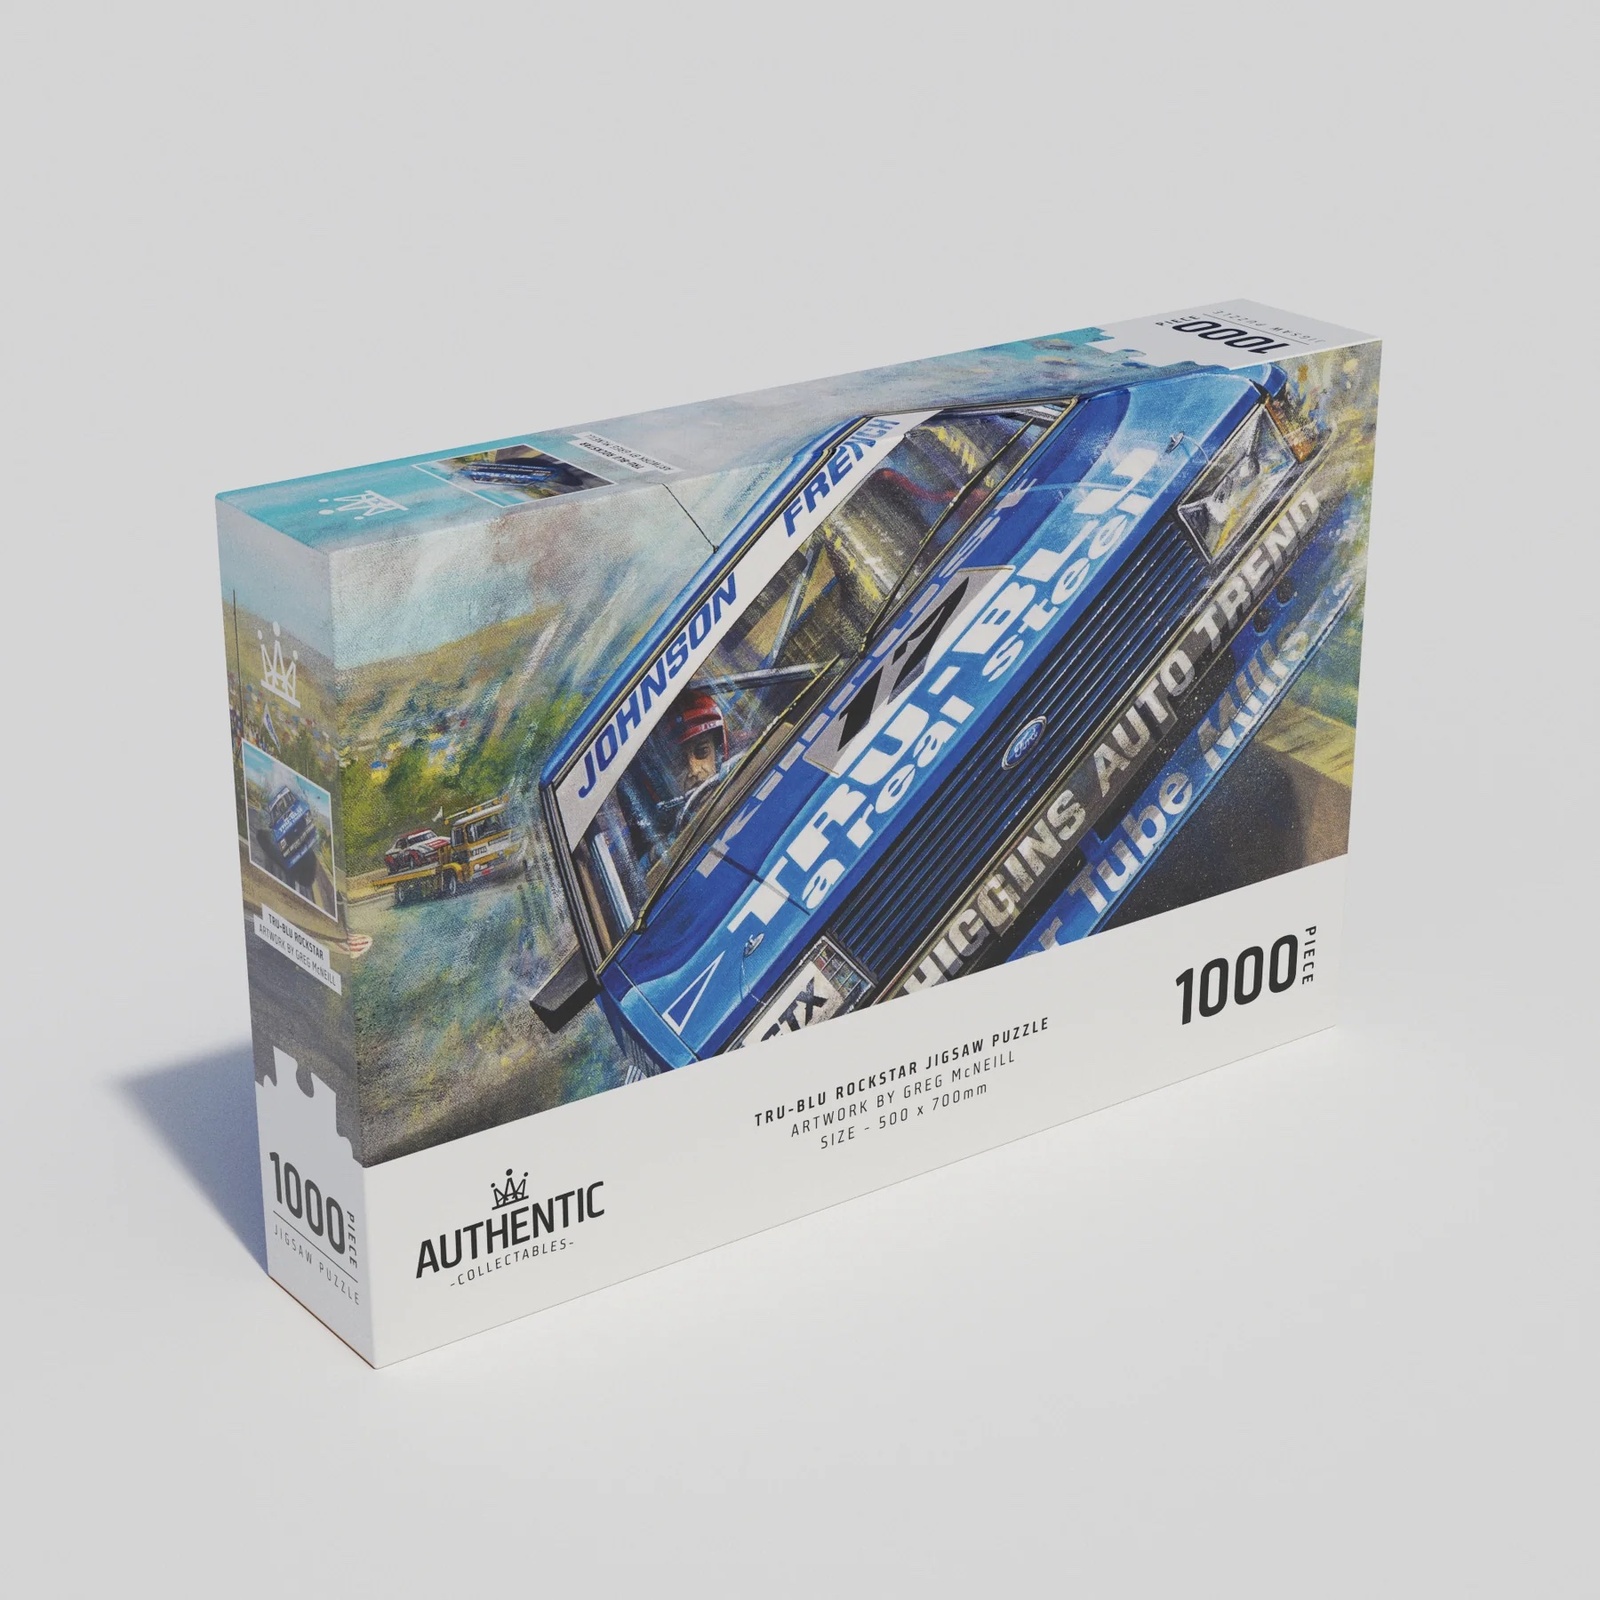 Authentic Collectables,Tru-Blu Rockstar Dick Johnson 1000 Piece Jigsaw Puzzle by Authentic Collectables